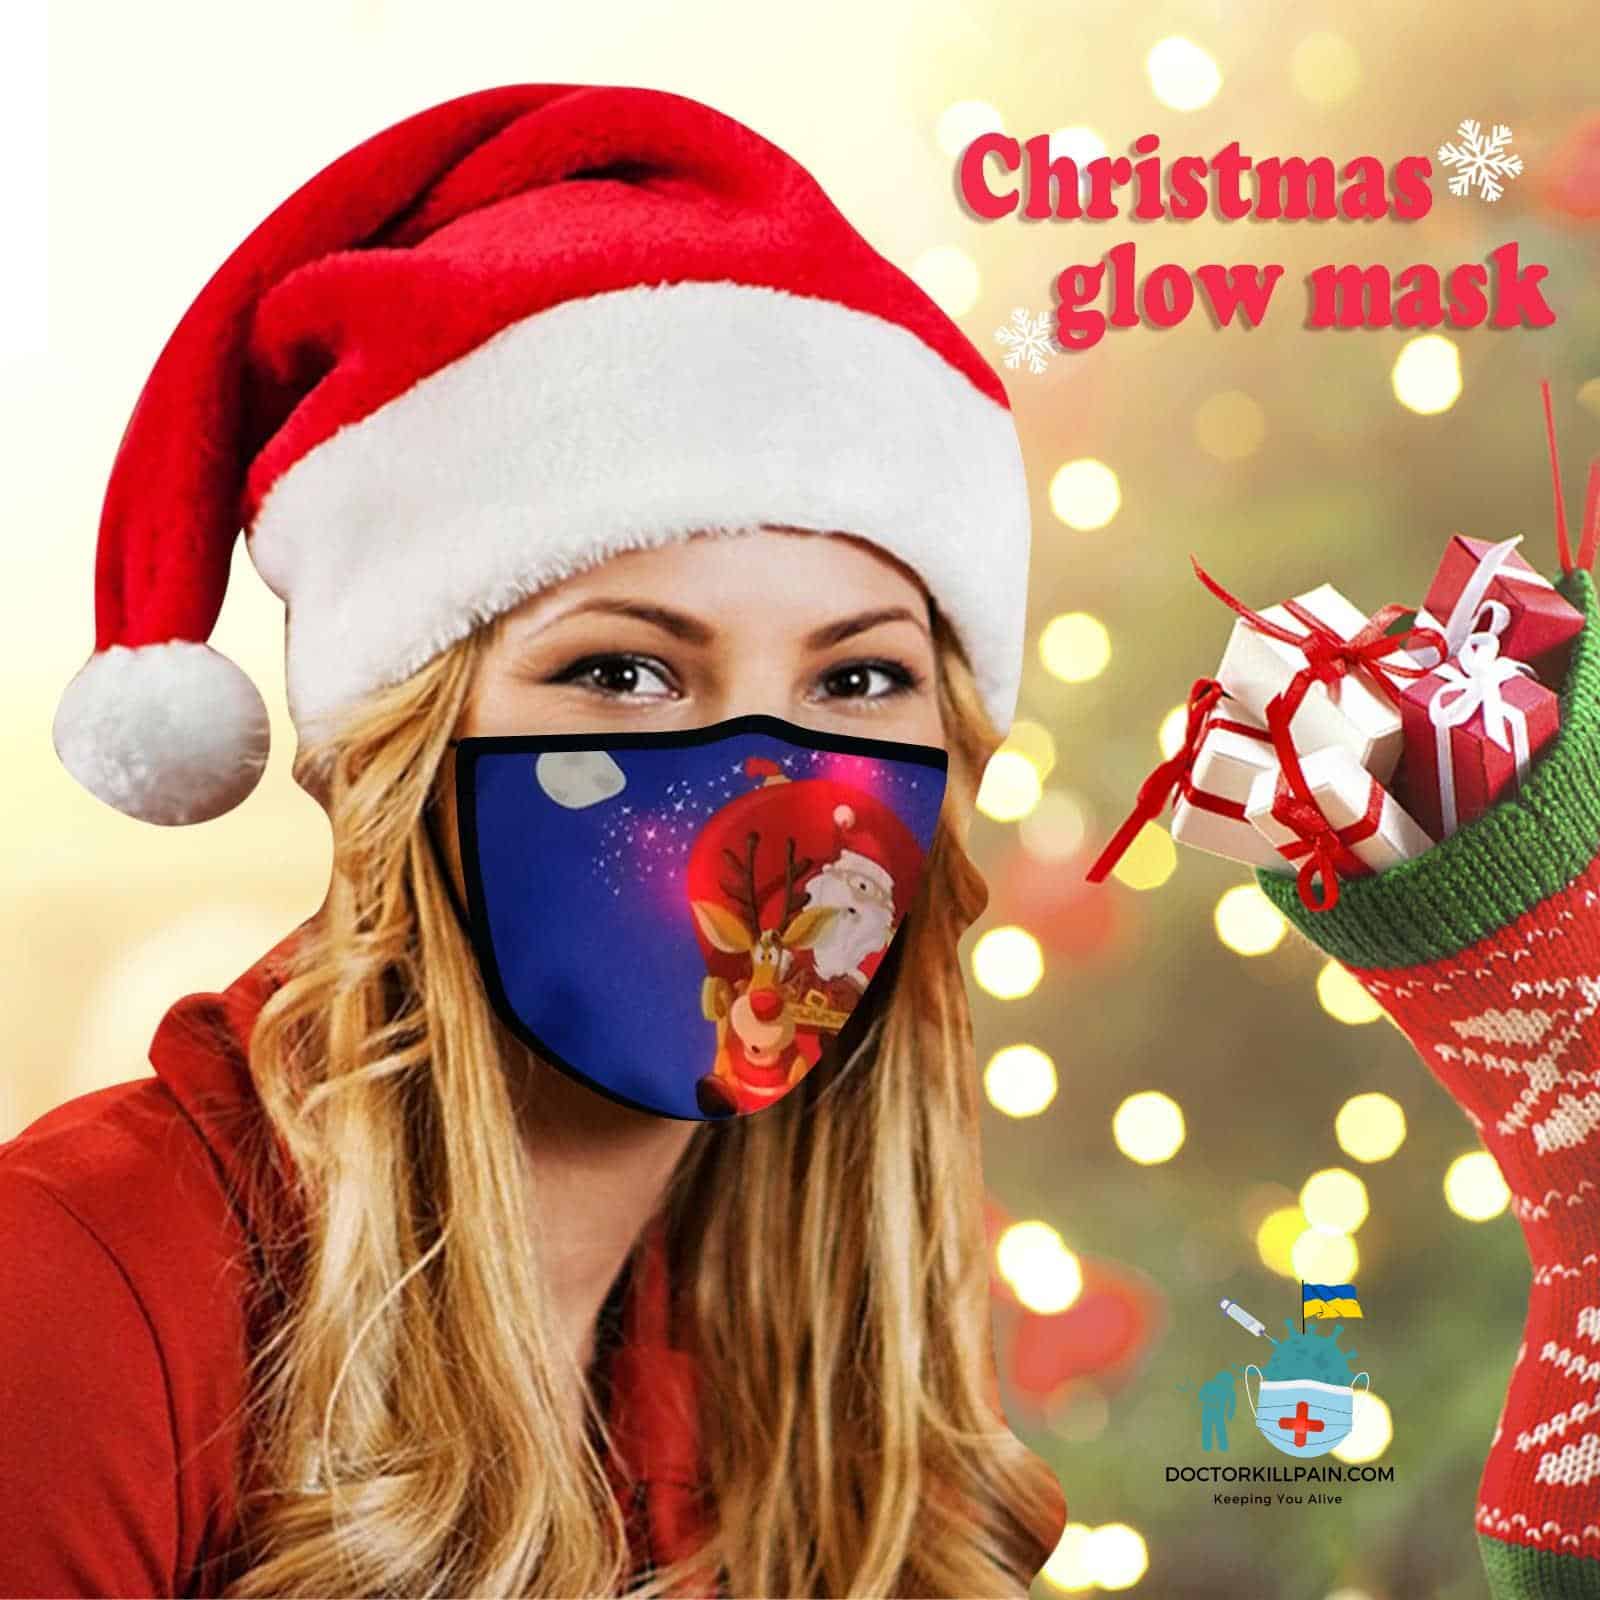 Christmas face Mask. Led Light Up Mask Glowing Christmas Mask Luminous Dust Mask Color Lights Party Rave Mask For Christmas Masquerade Men And Women